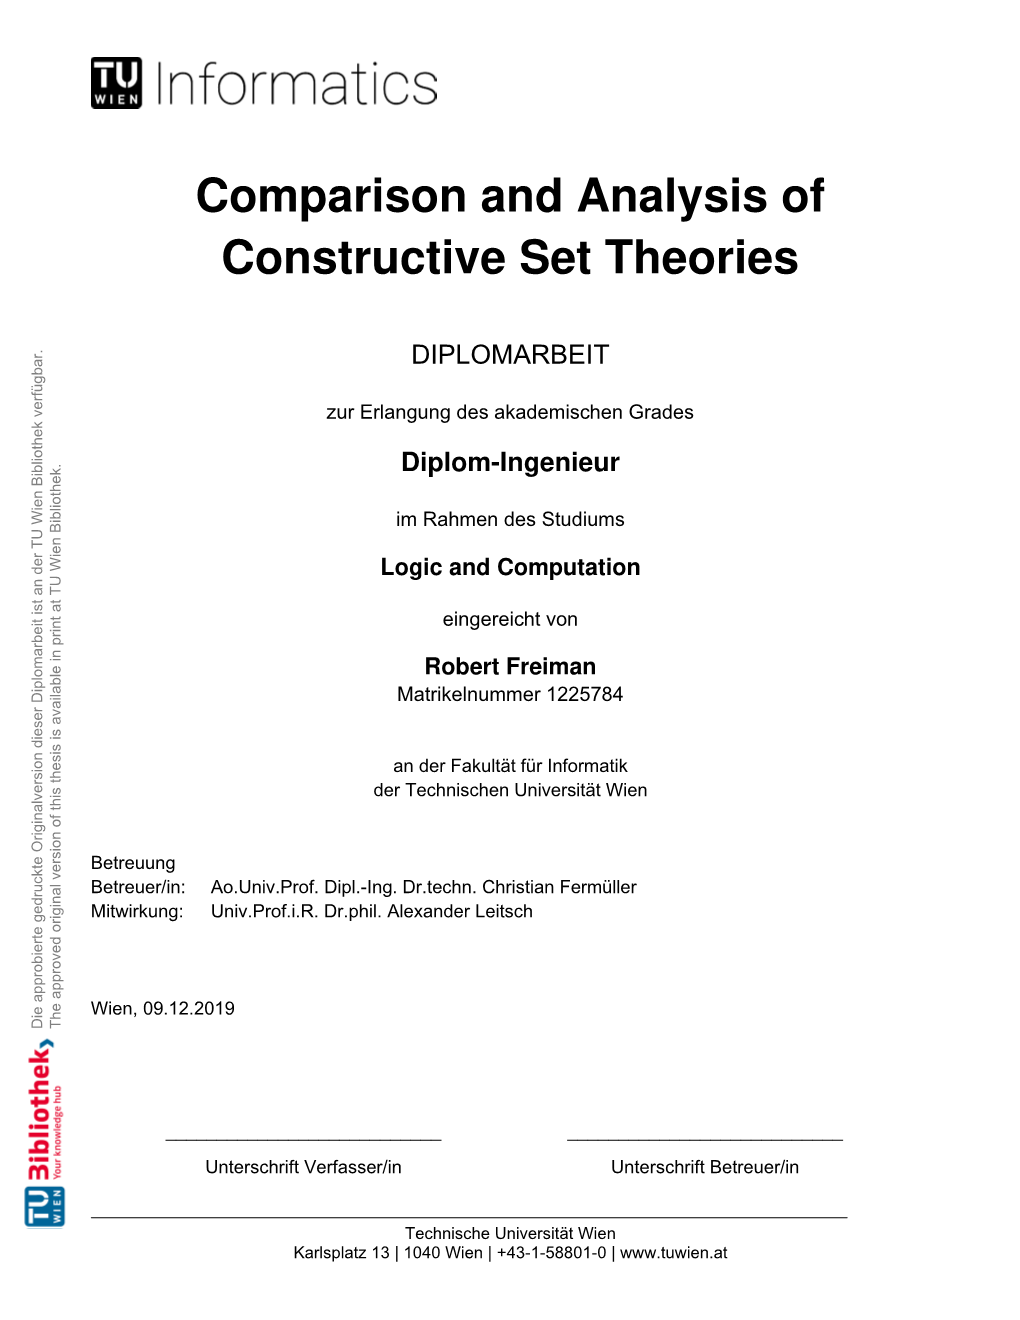 Comparison and Analysis of Constructive Set Theories